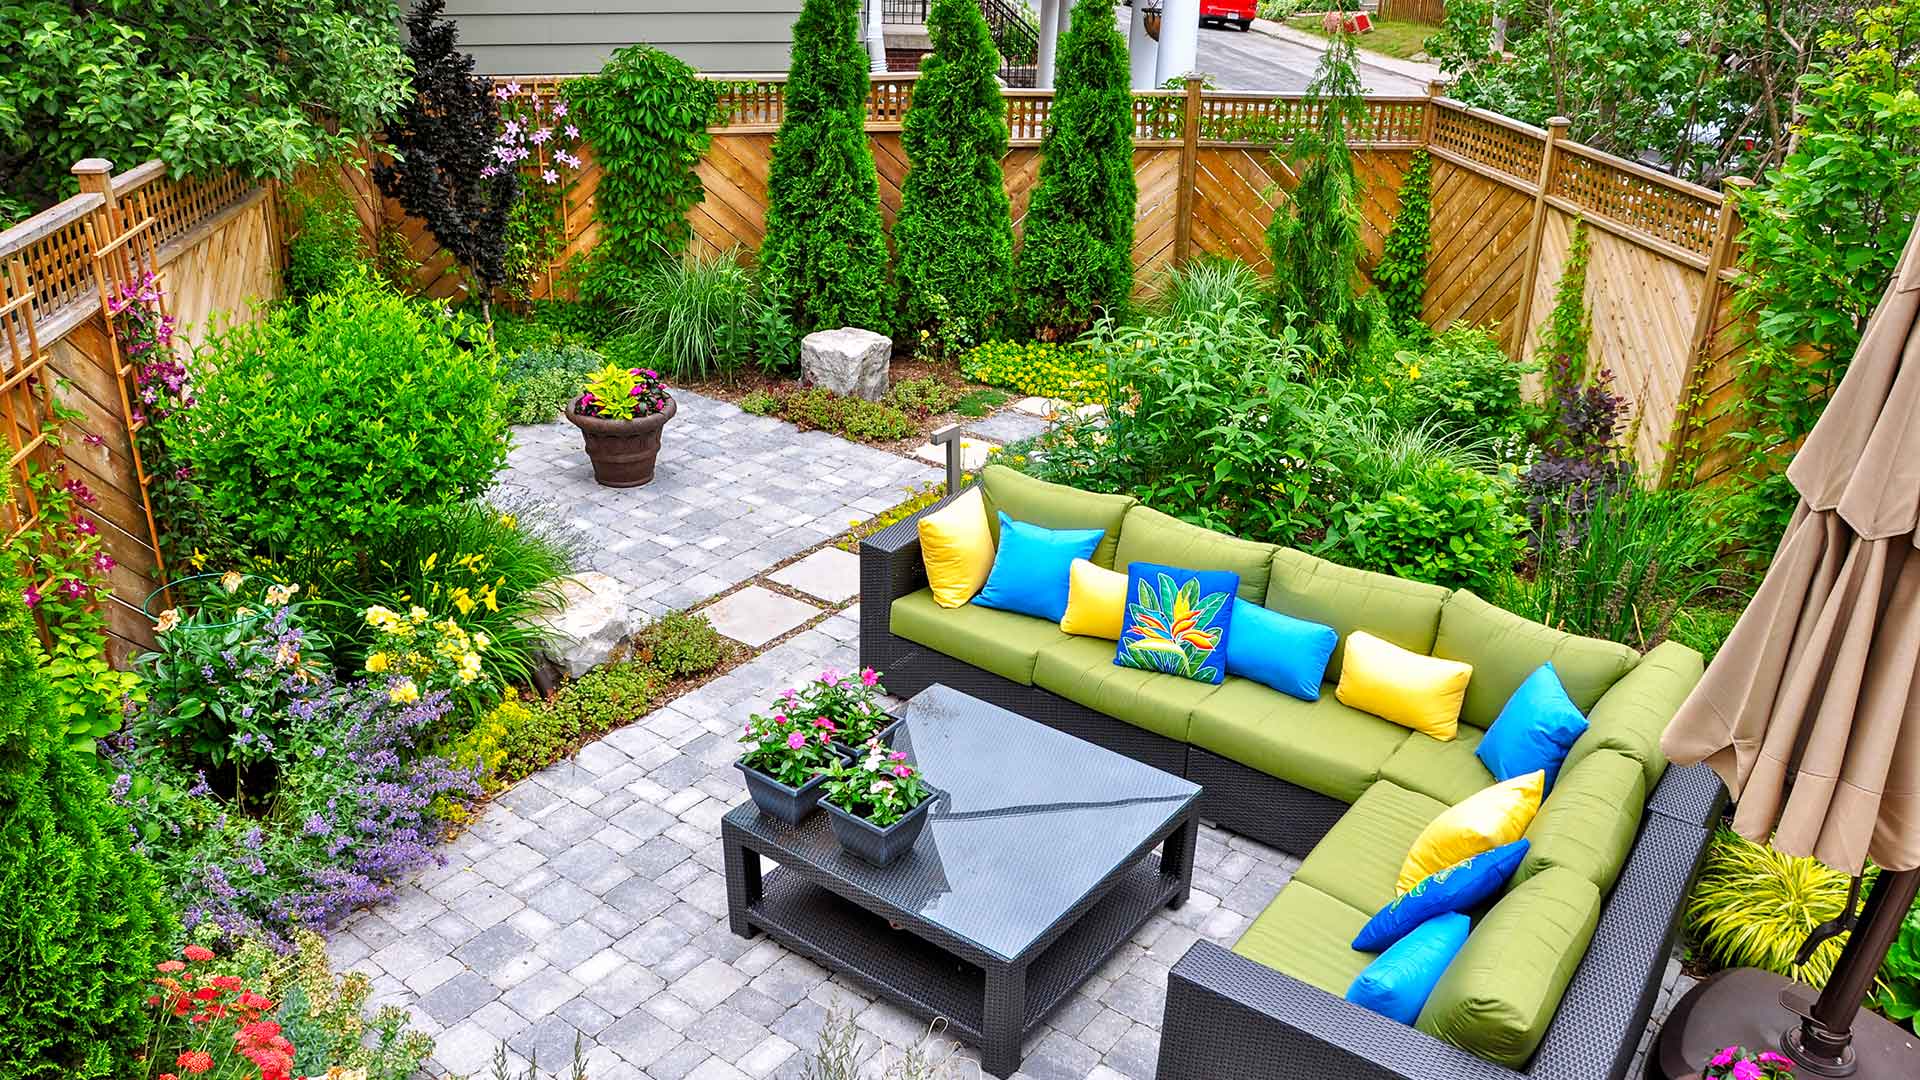 A property with maintained pavers and plants in Haymarket, VA.